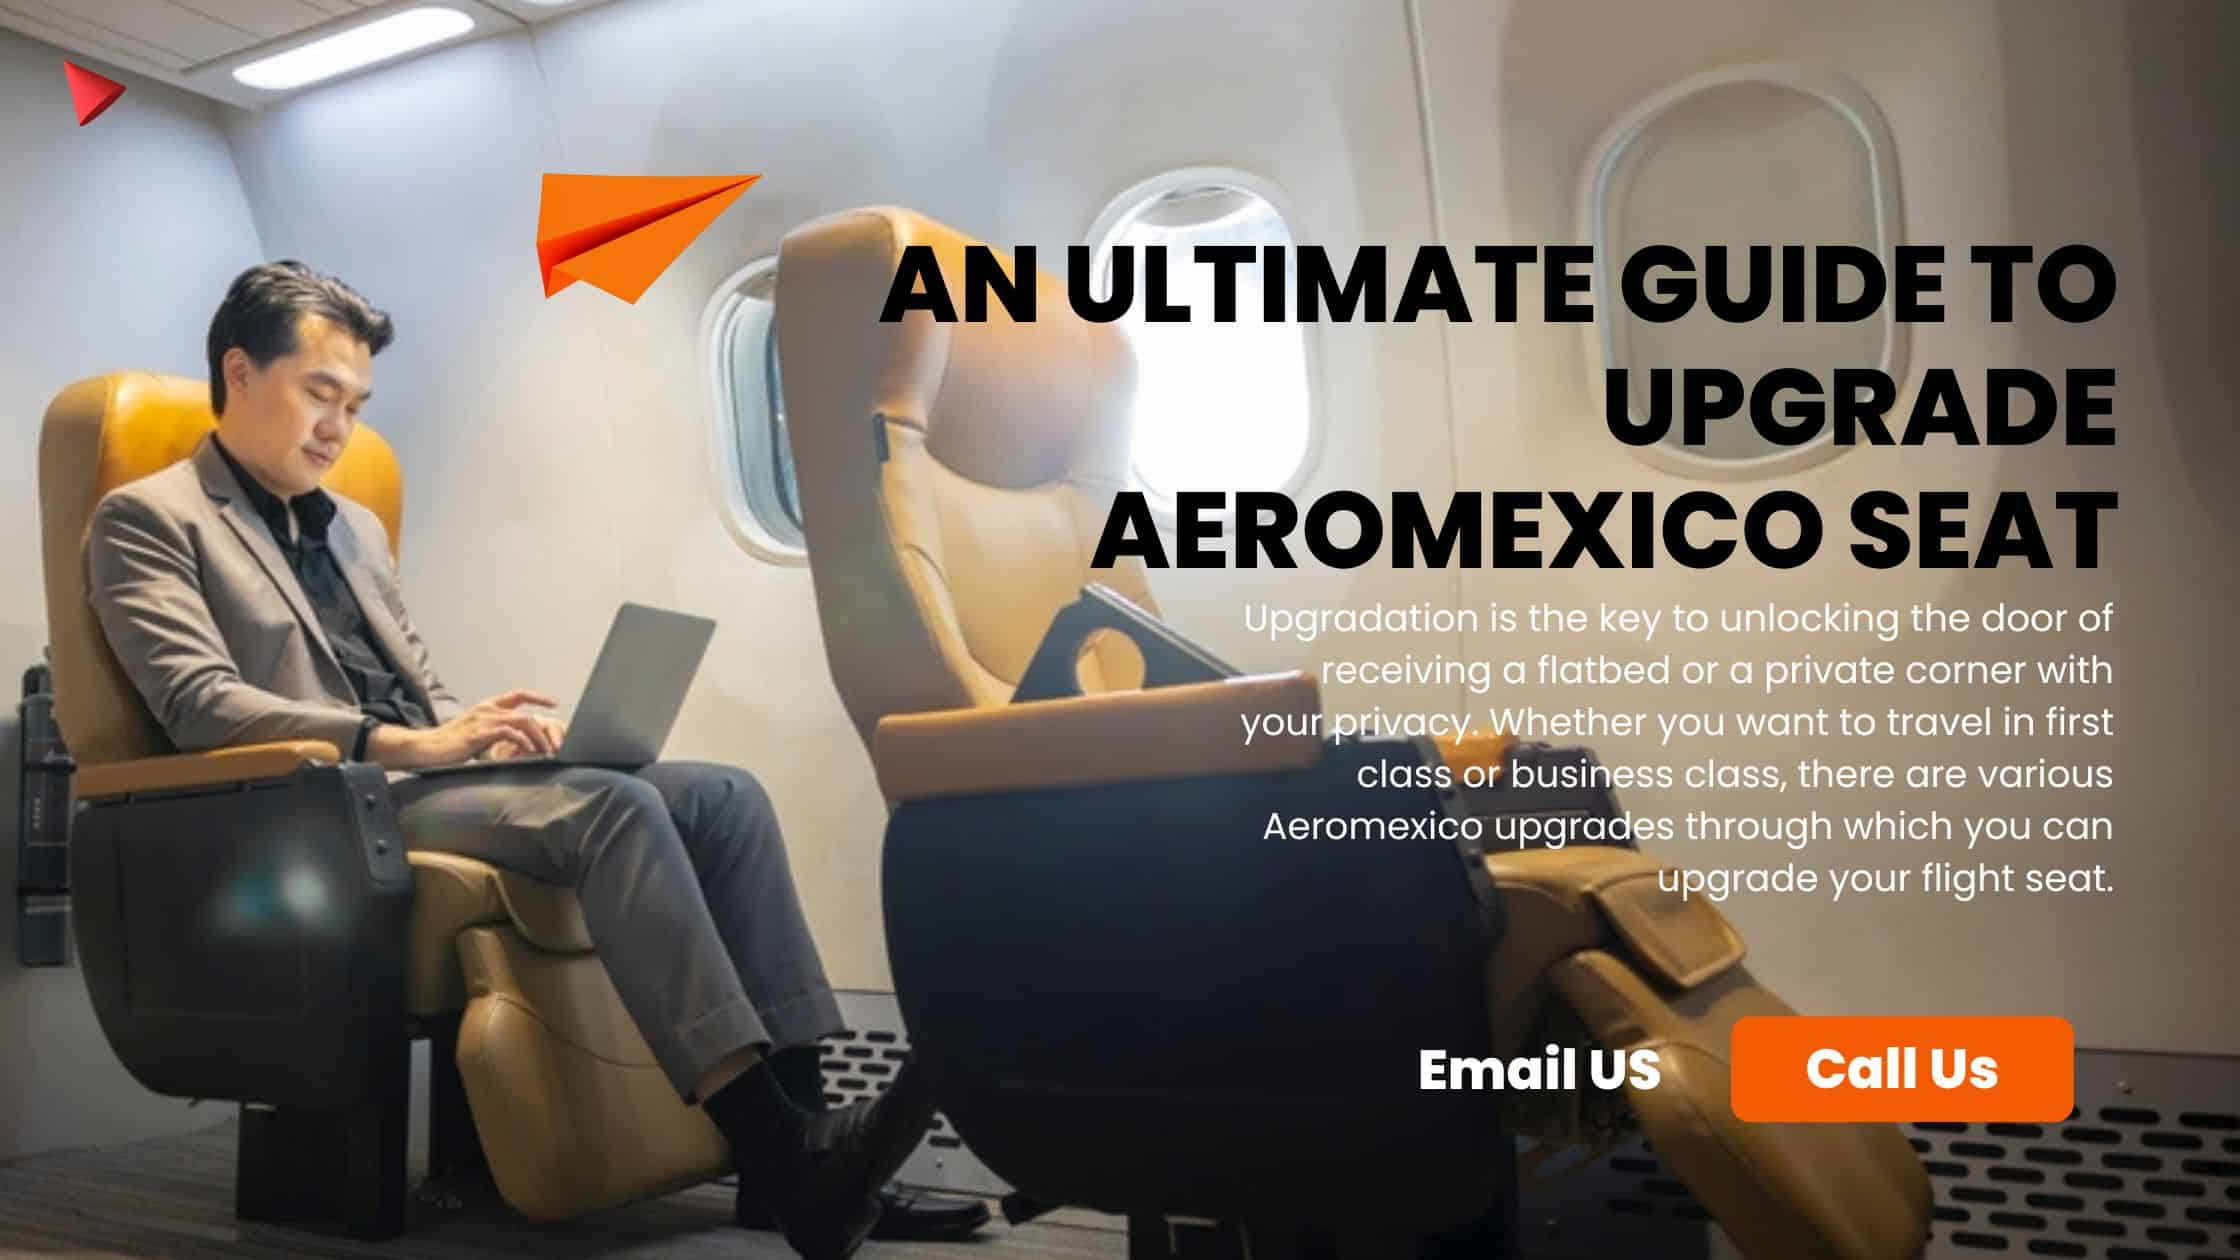 An Ultimate Guide to Upgrade Aeromexico Seat